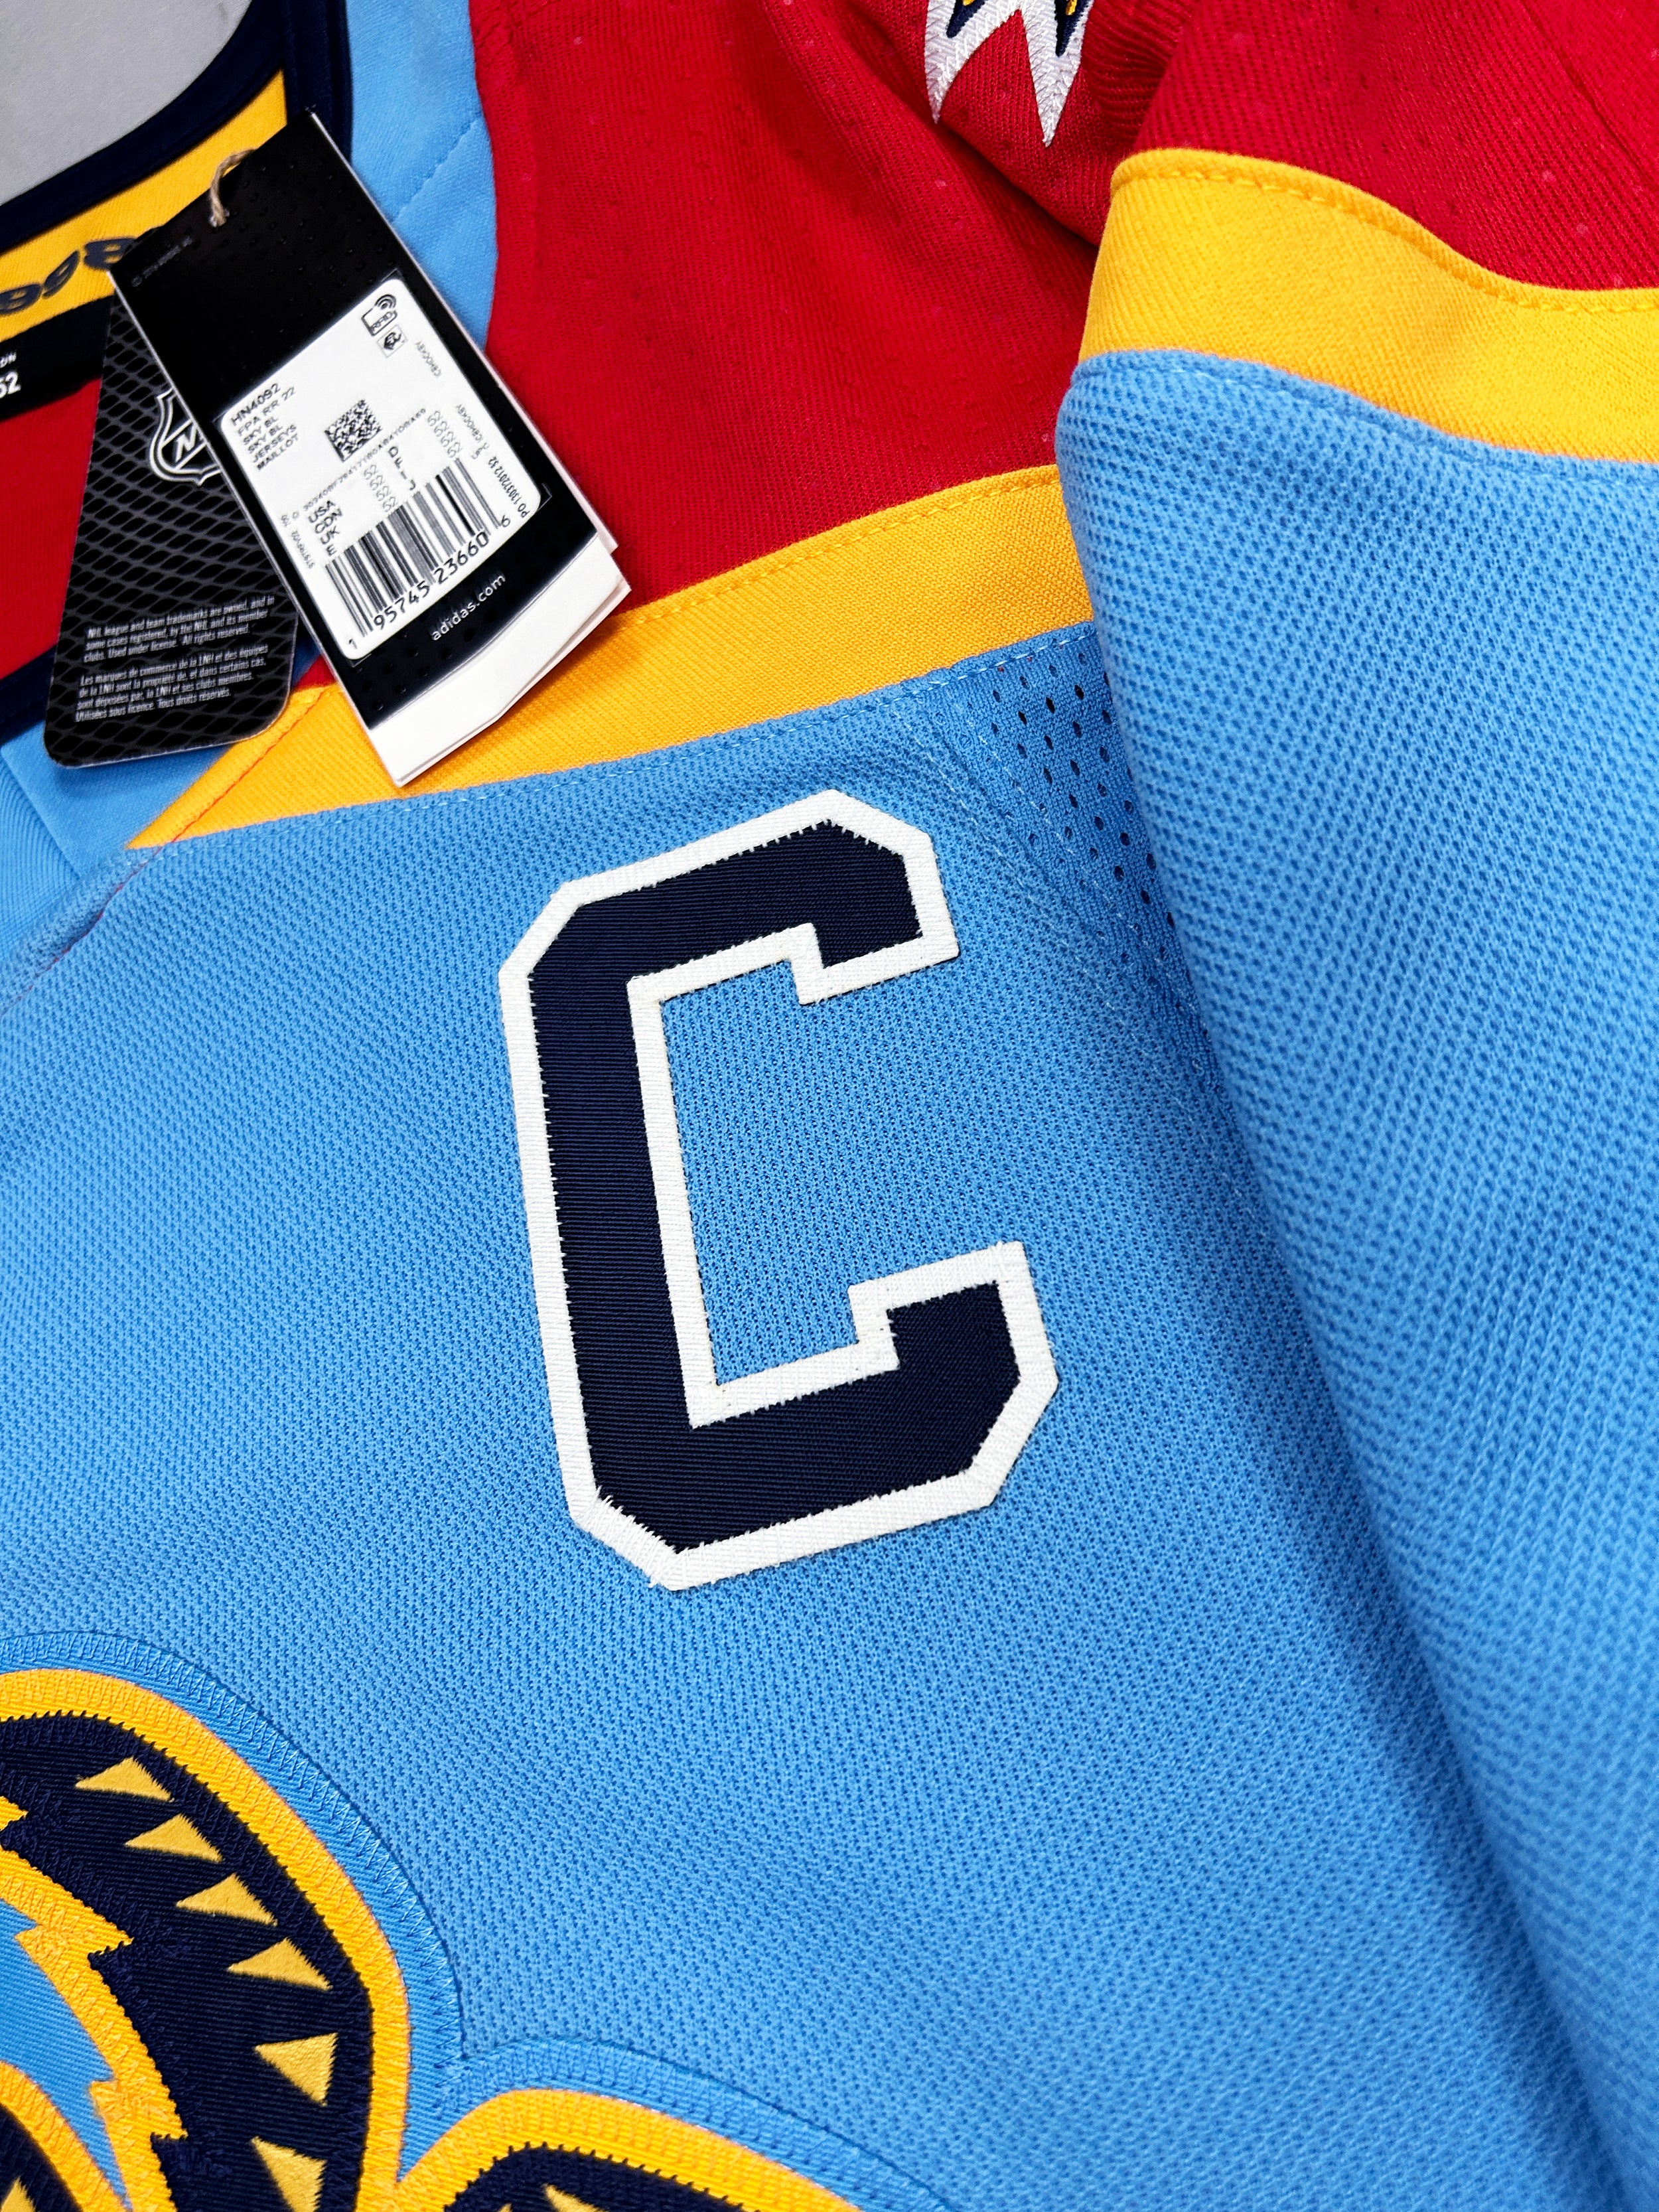 Rating the NHL Reverse Retro jerseys for all 32 teams 